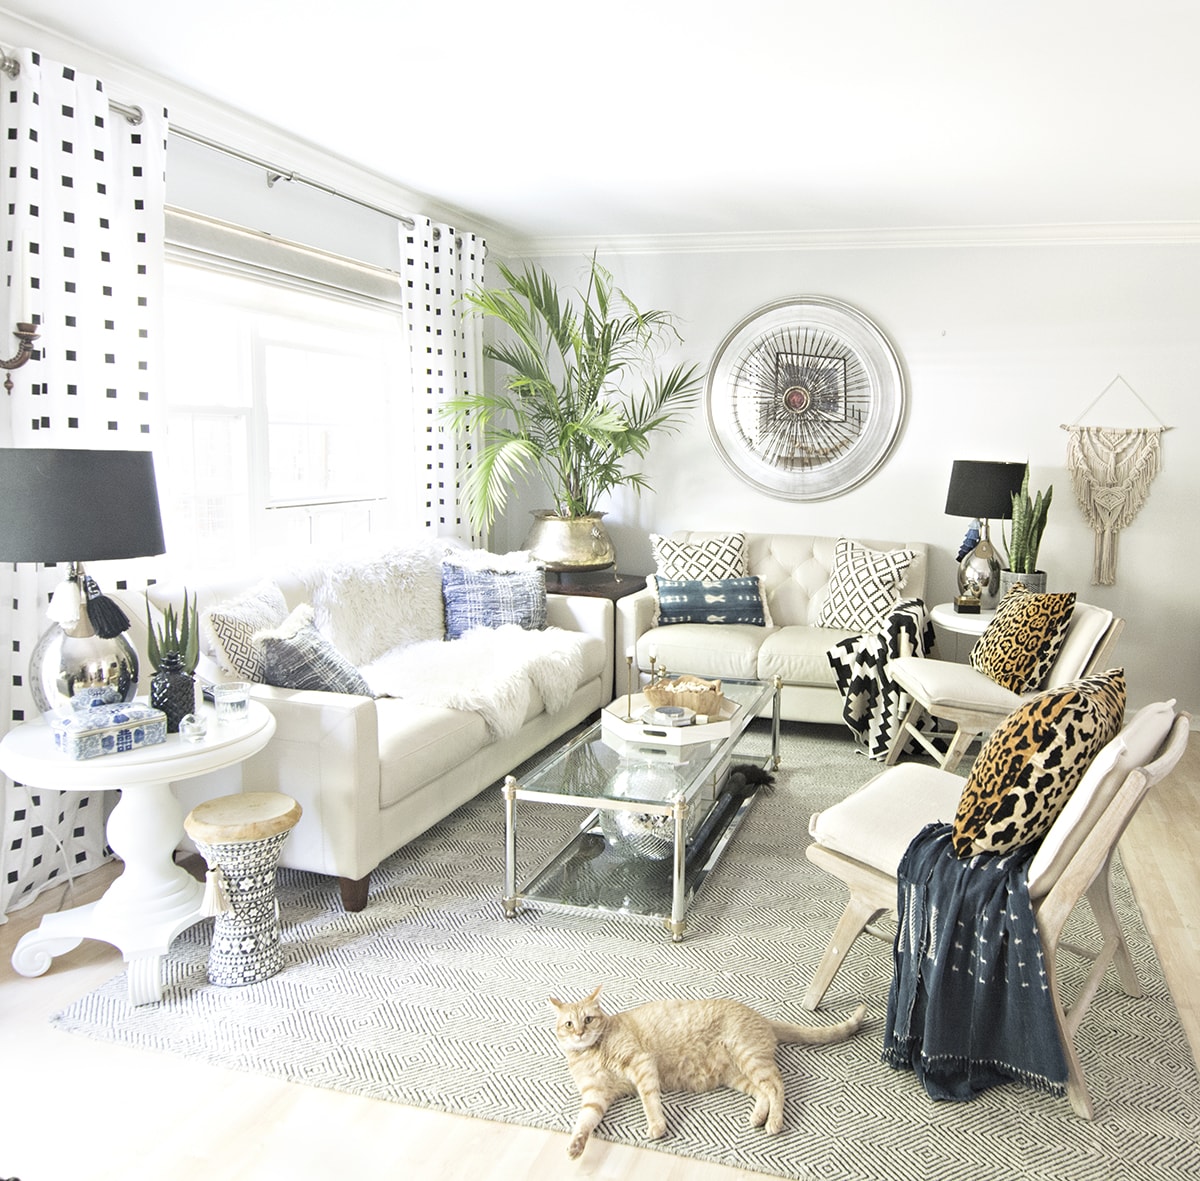 Neutral Living Room with a Boho Touch